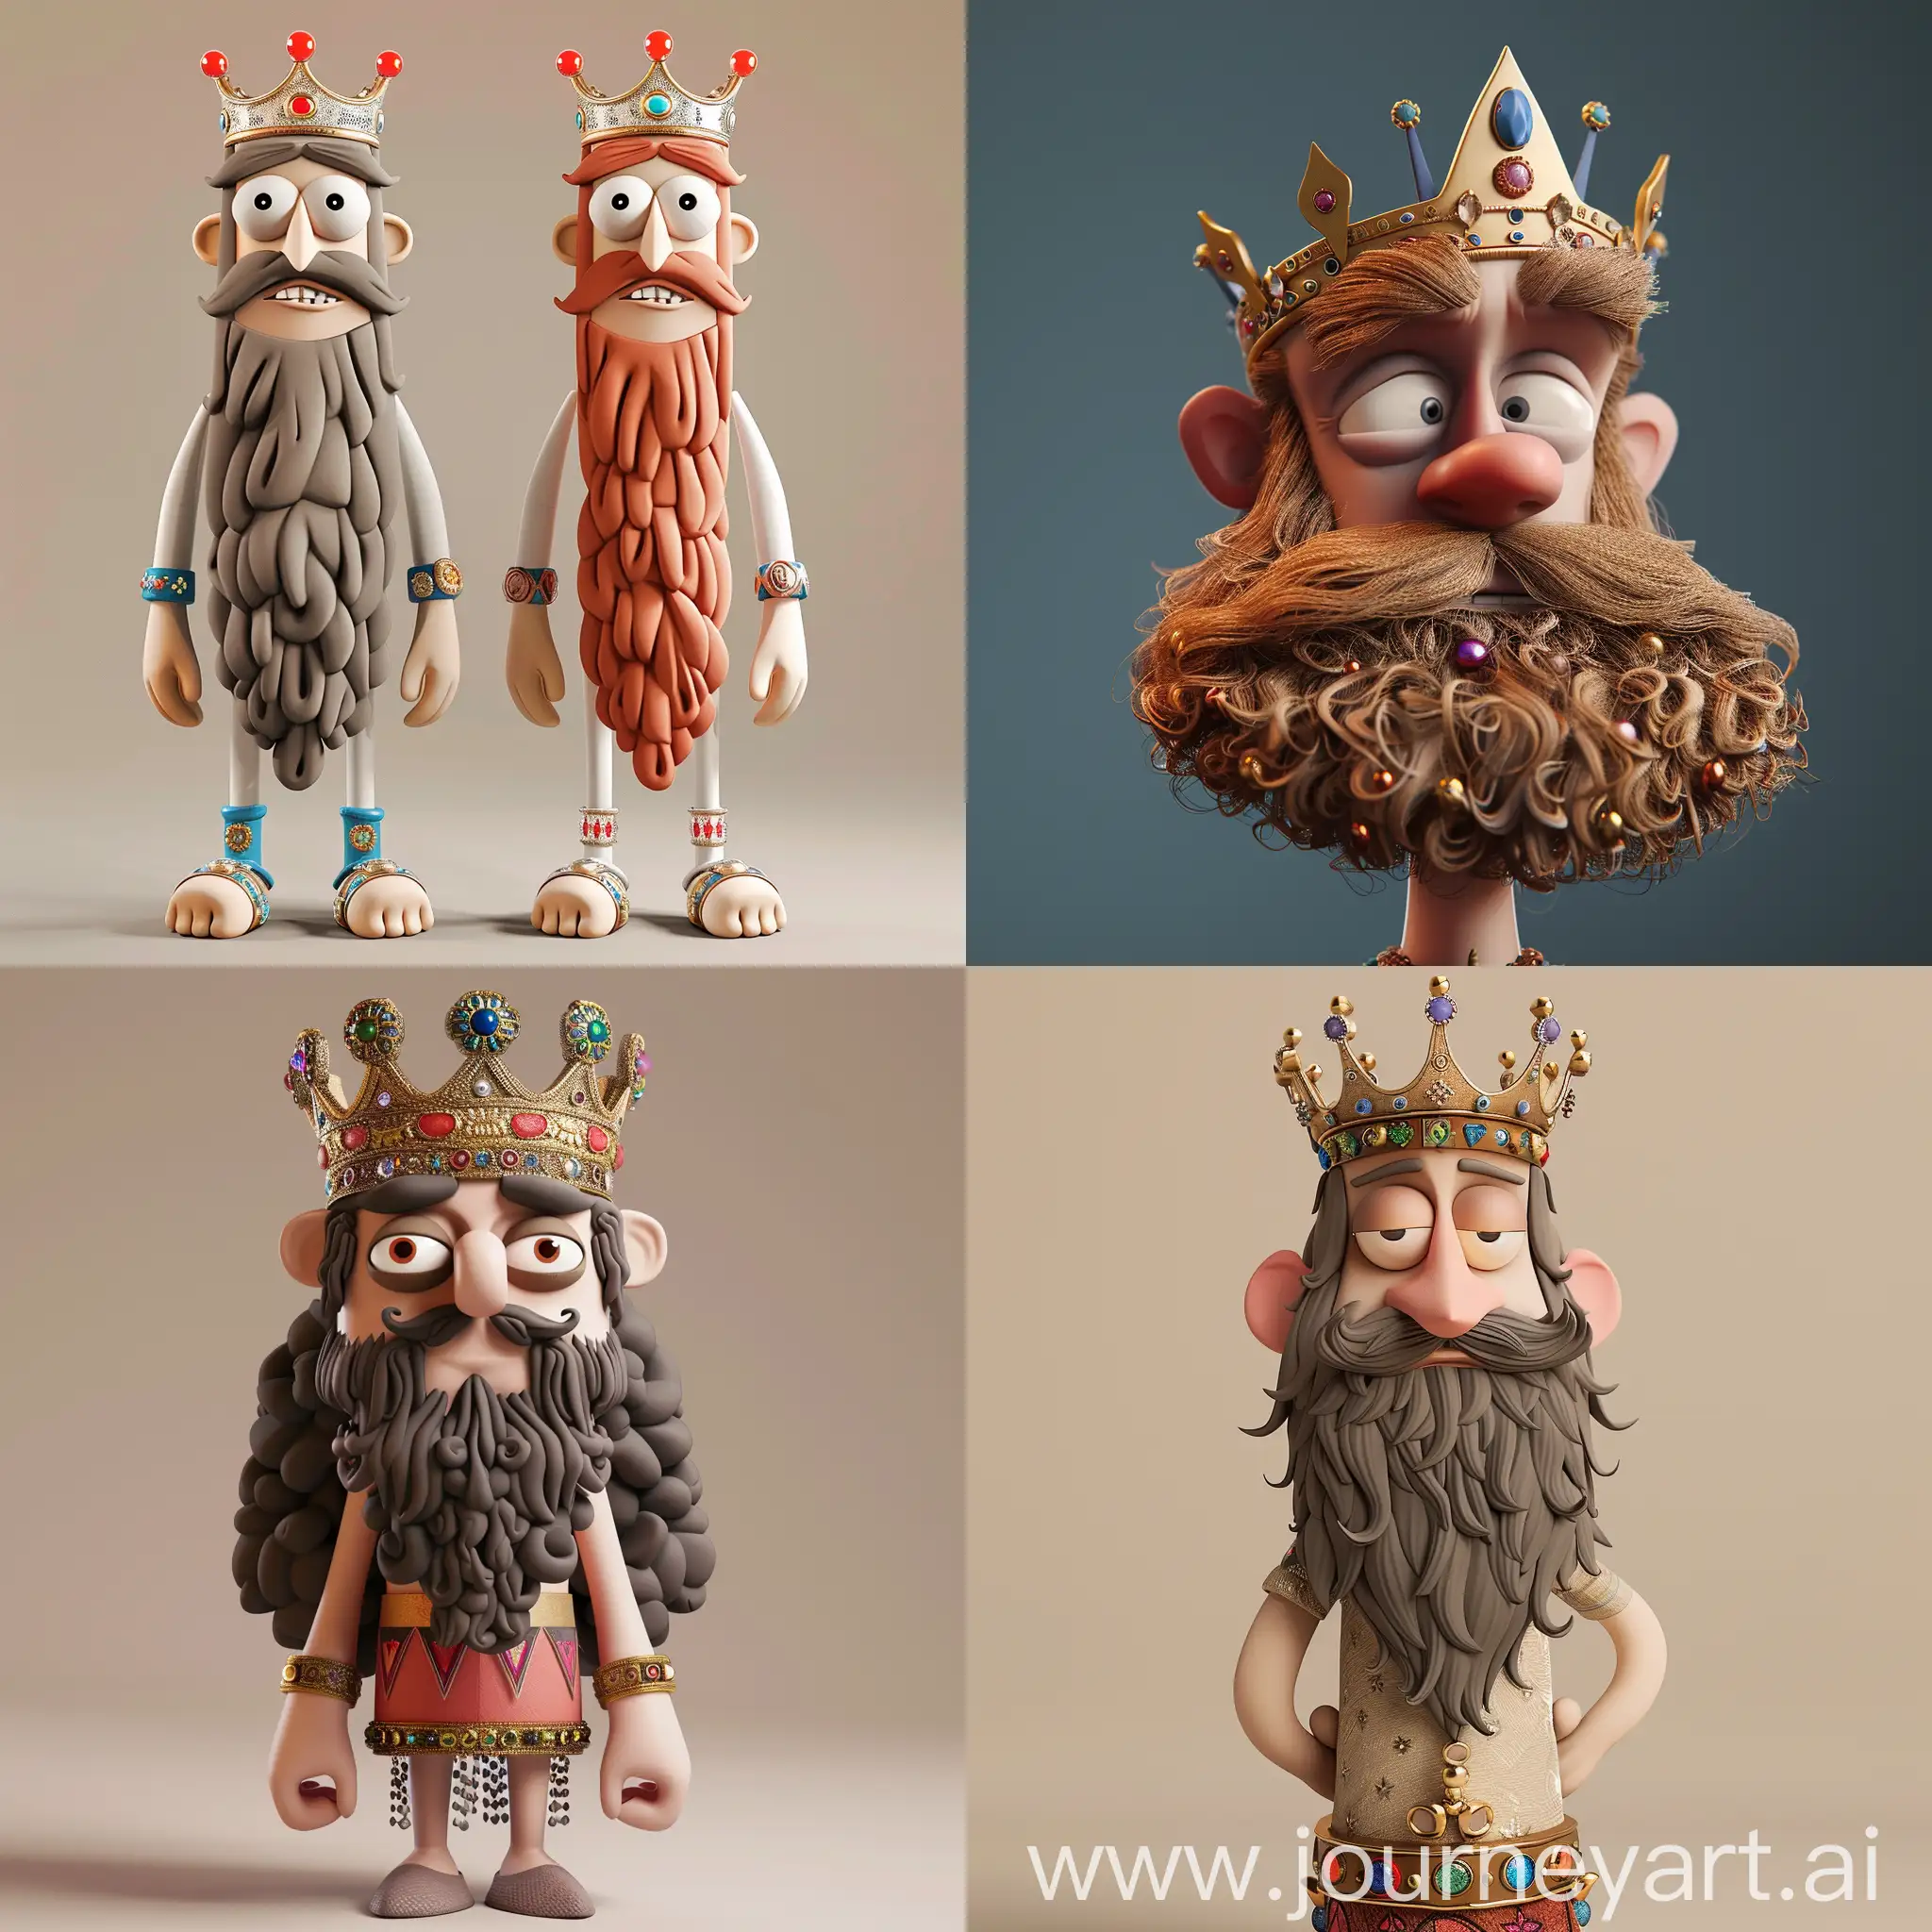 Arab-King-Toy-with-Bushy-Beard-Crown-and-Jewels-in-Labyrinth-Setting